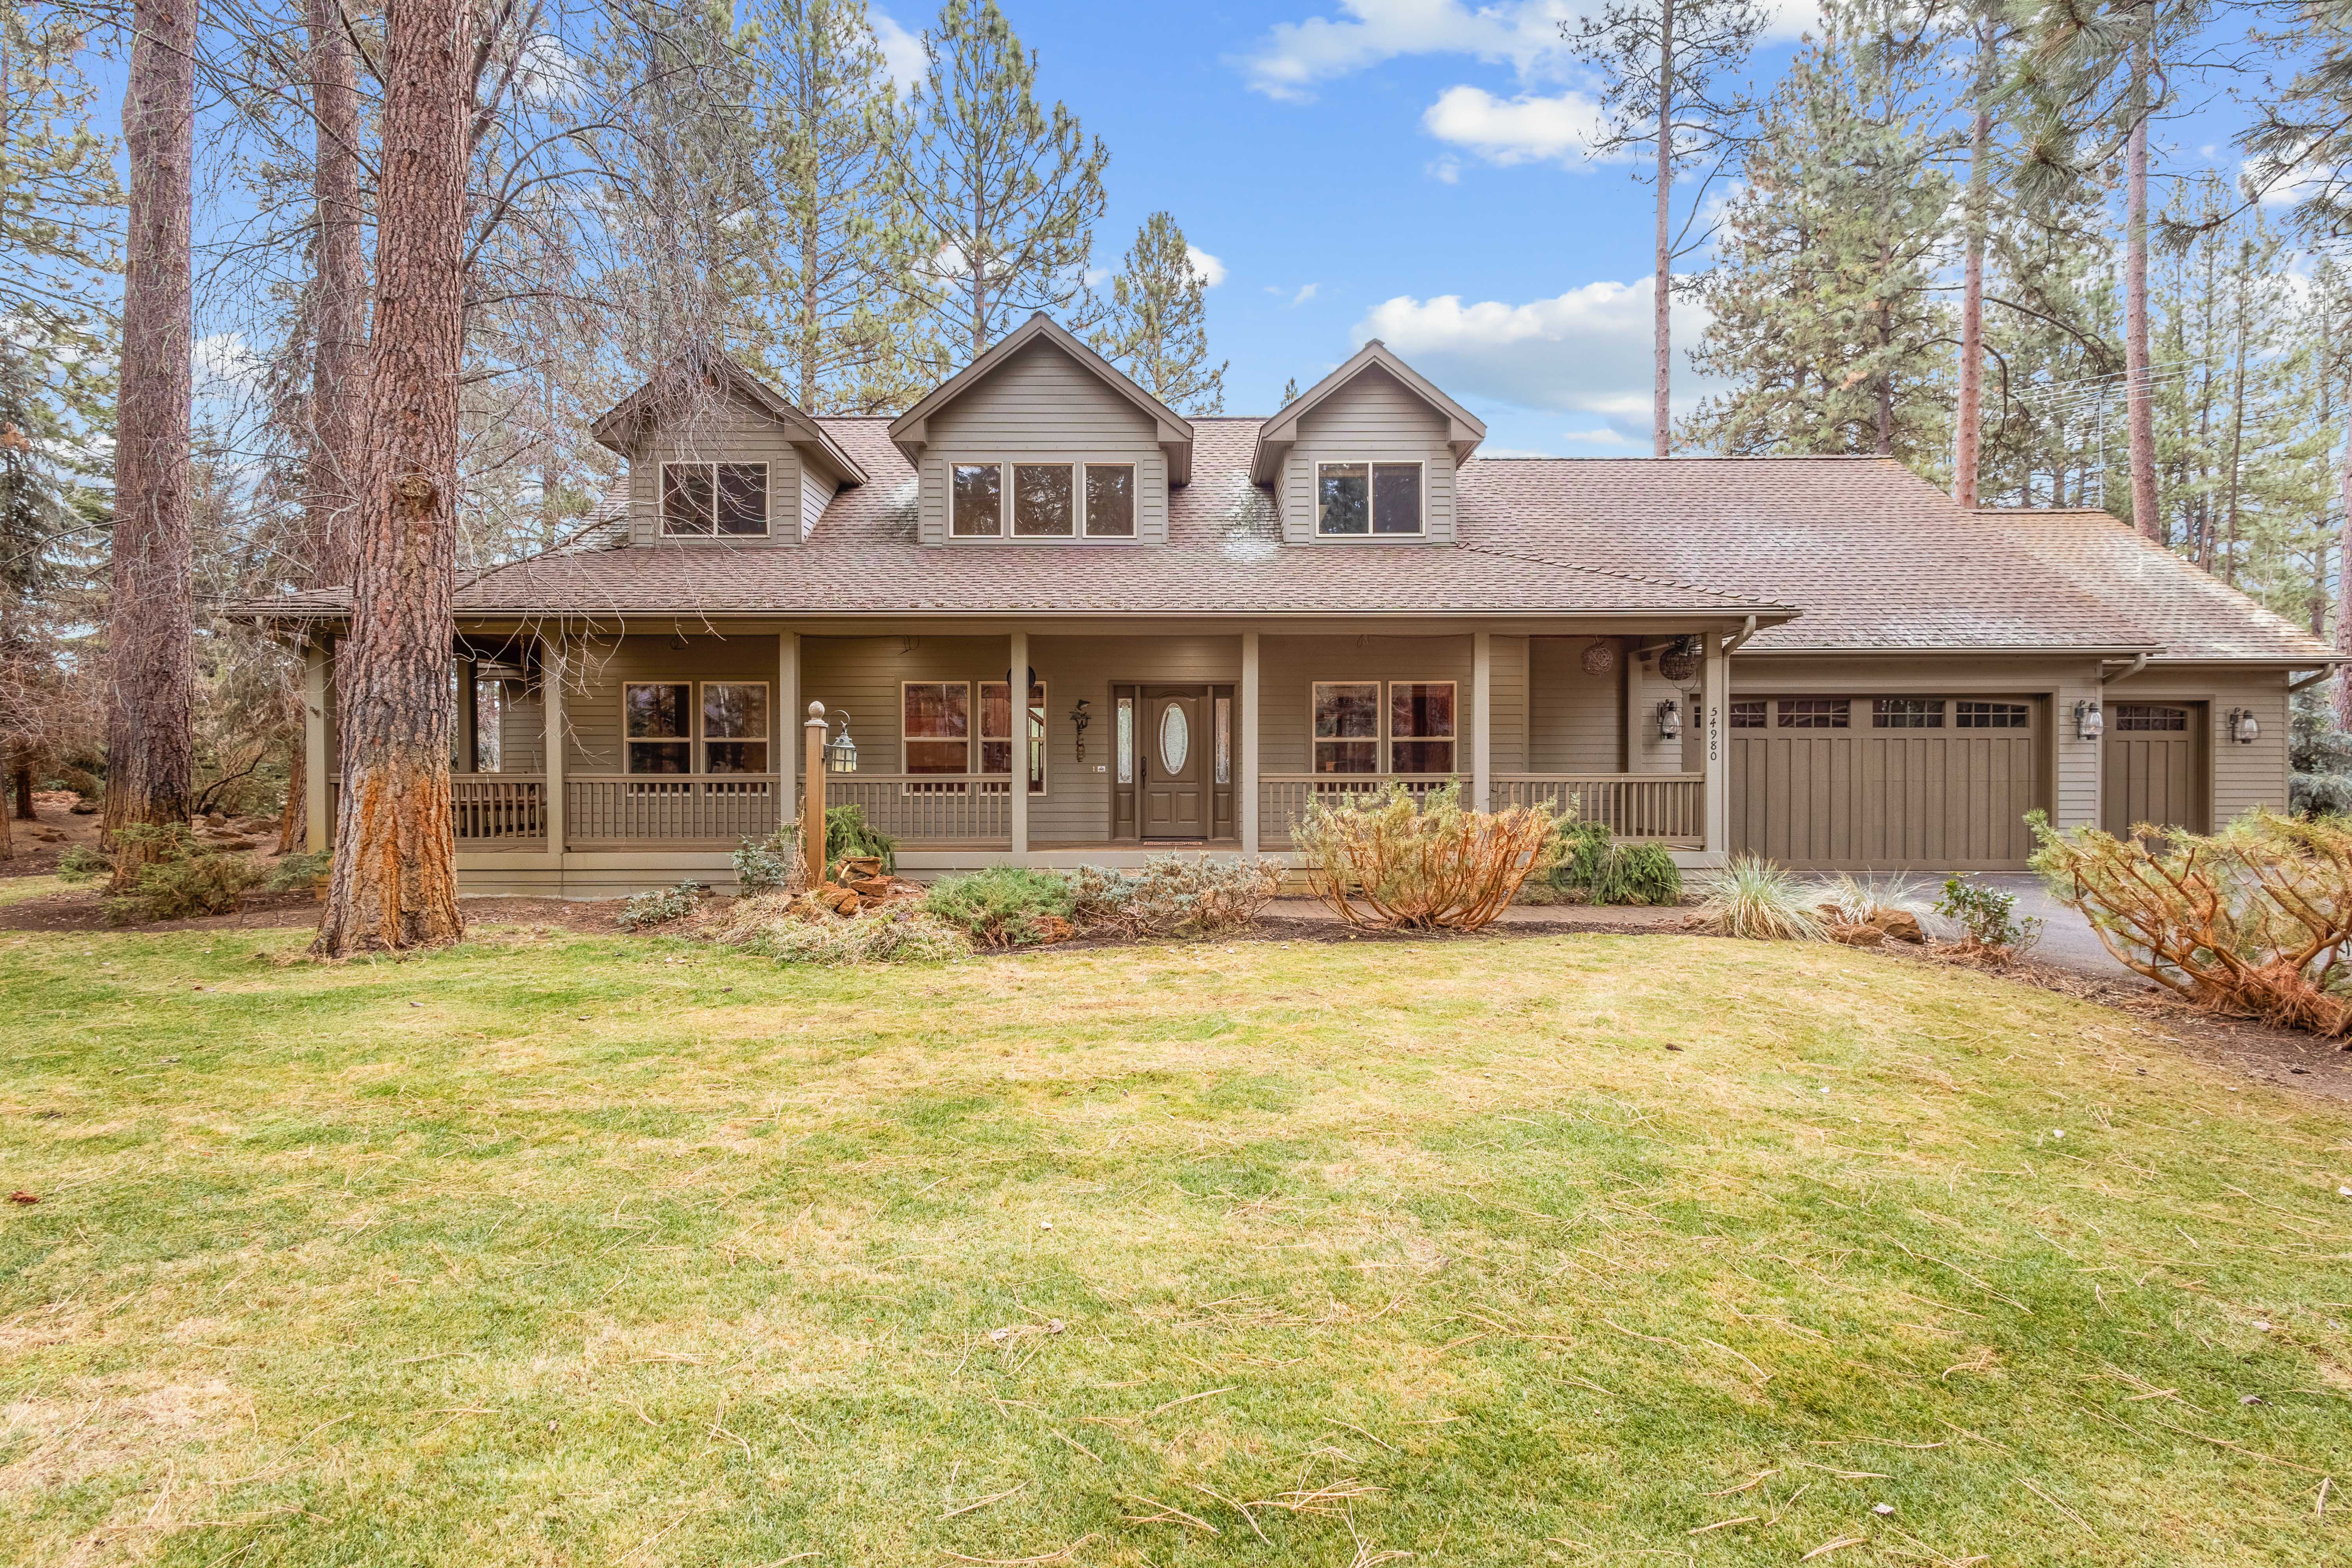 54980 Peyton Place, Bend, Oregon, 97707, United States, 4 Bedrooms Bedrooms, ,4 BathroomsBathrooms,Residential,For Sale,54980 Peyton Place,1431907